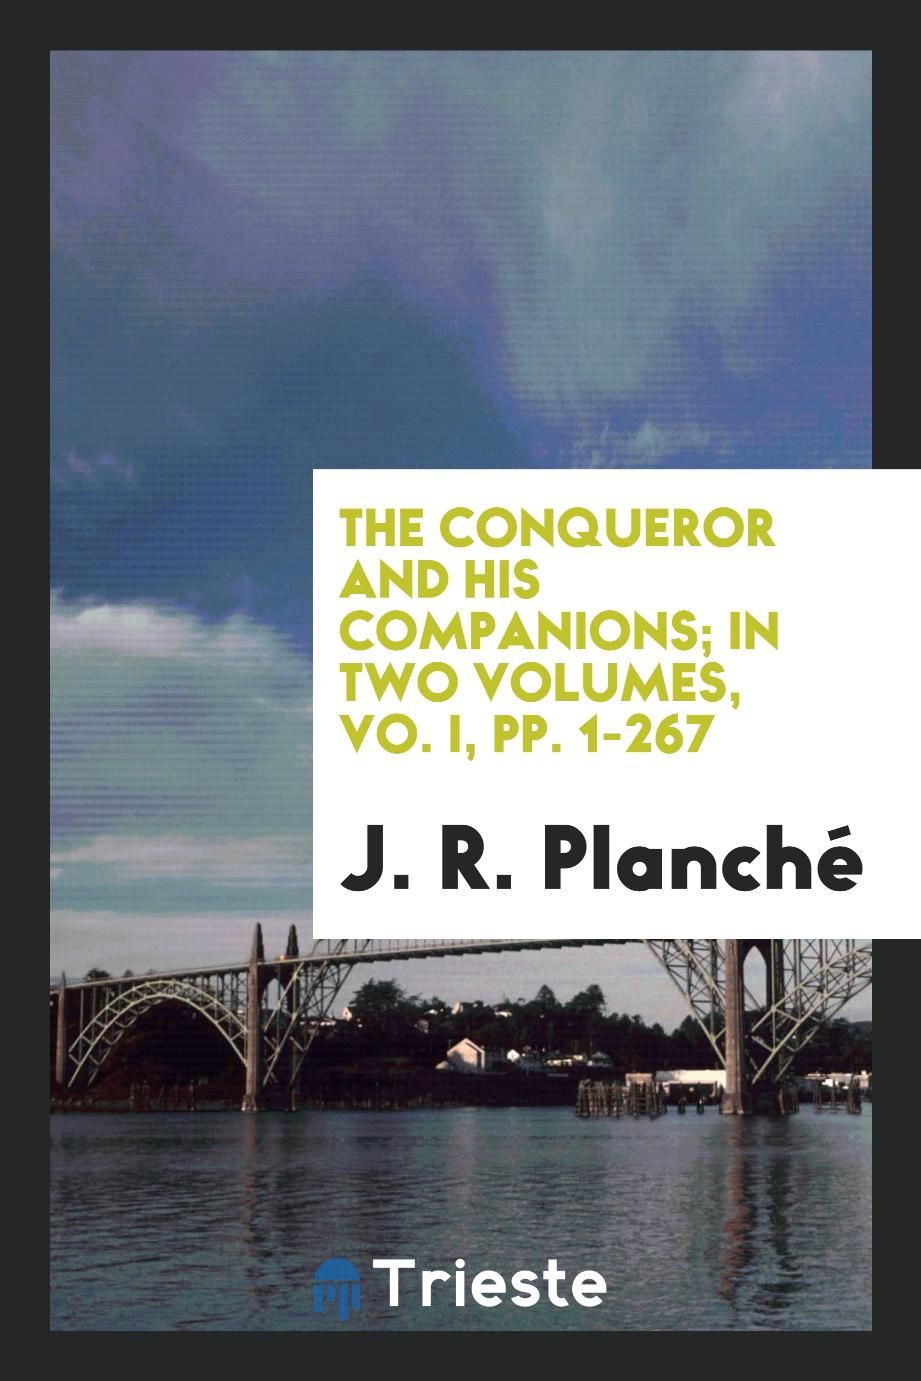 The Conqueror and His Companions; In Two Volumes, Vo. I, pp. 1-267